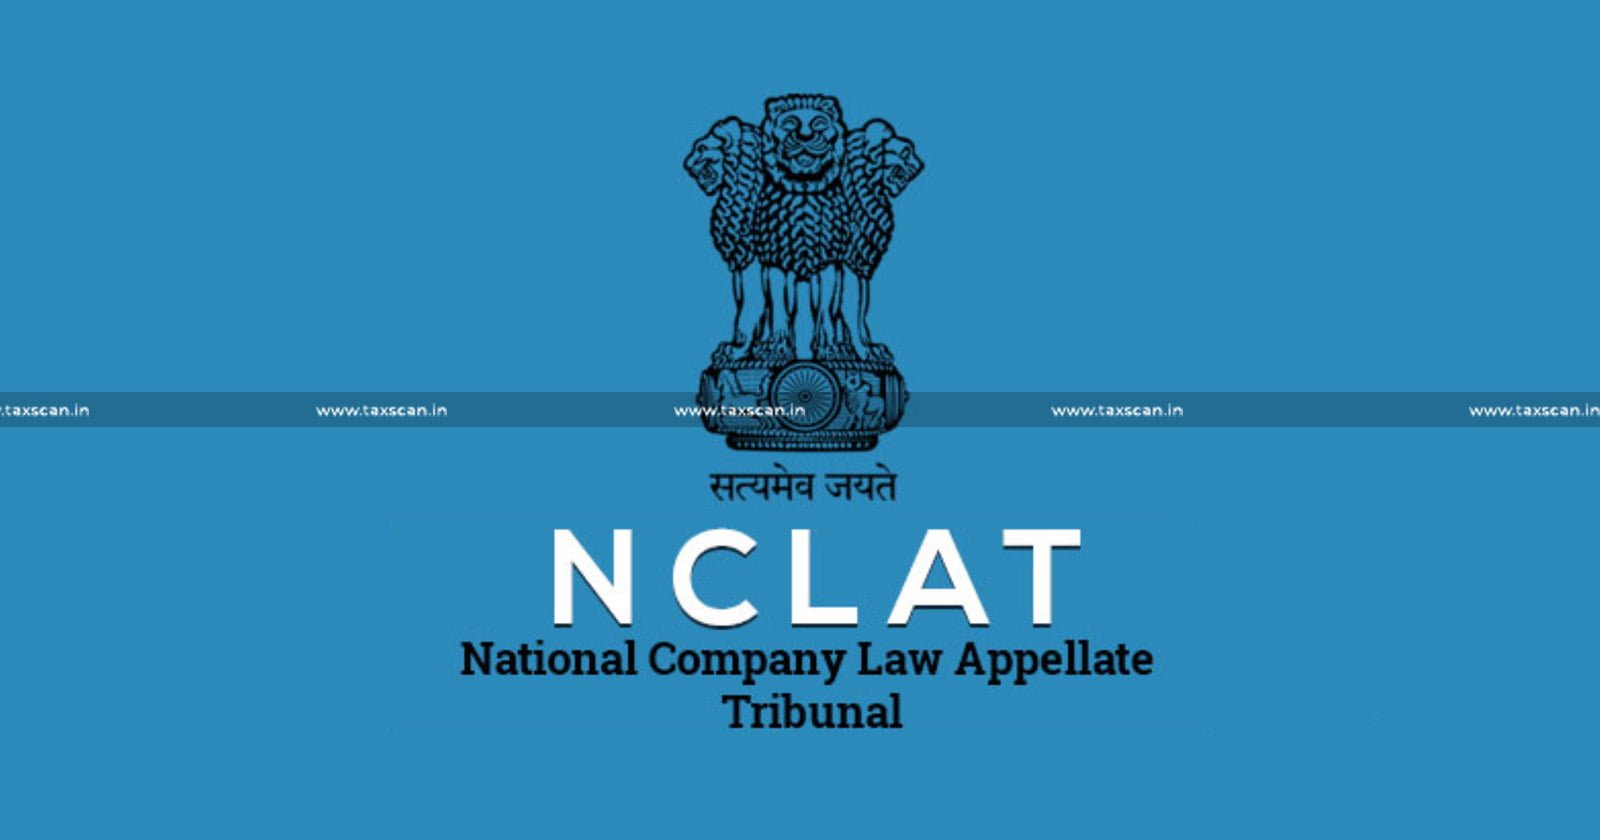 Legal Representative of Deceased - Legal Representative - Party of Proceedings - Proceedings - Companies Act - NCLAT upholds NCLT Order - NCLAT - NCLT Order - NCLT - taxscan